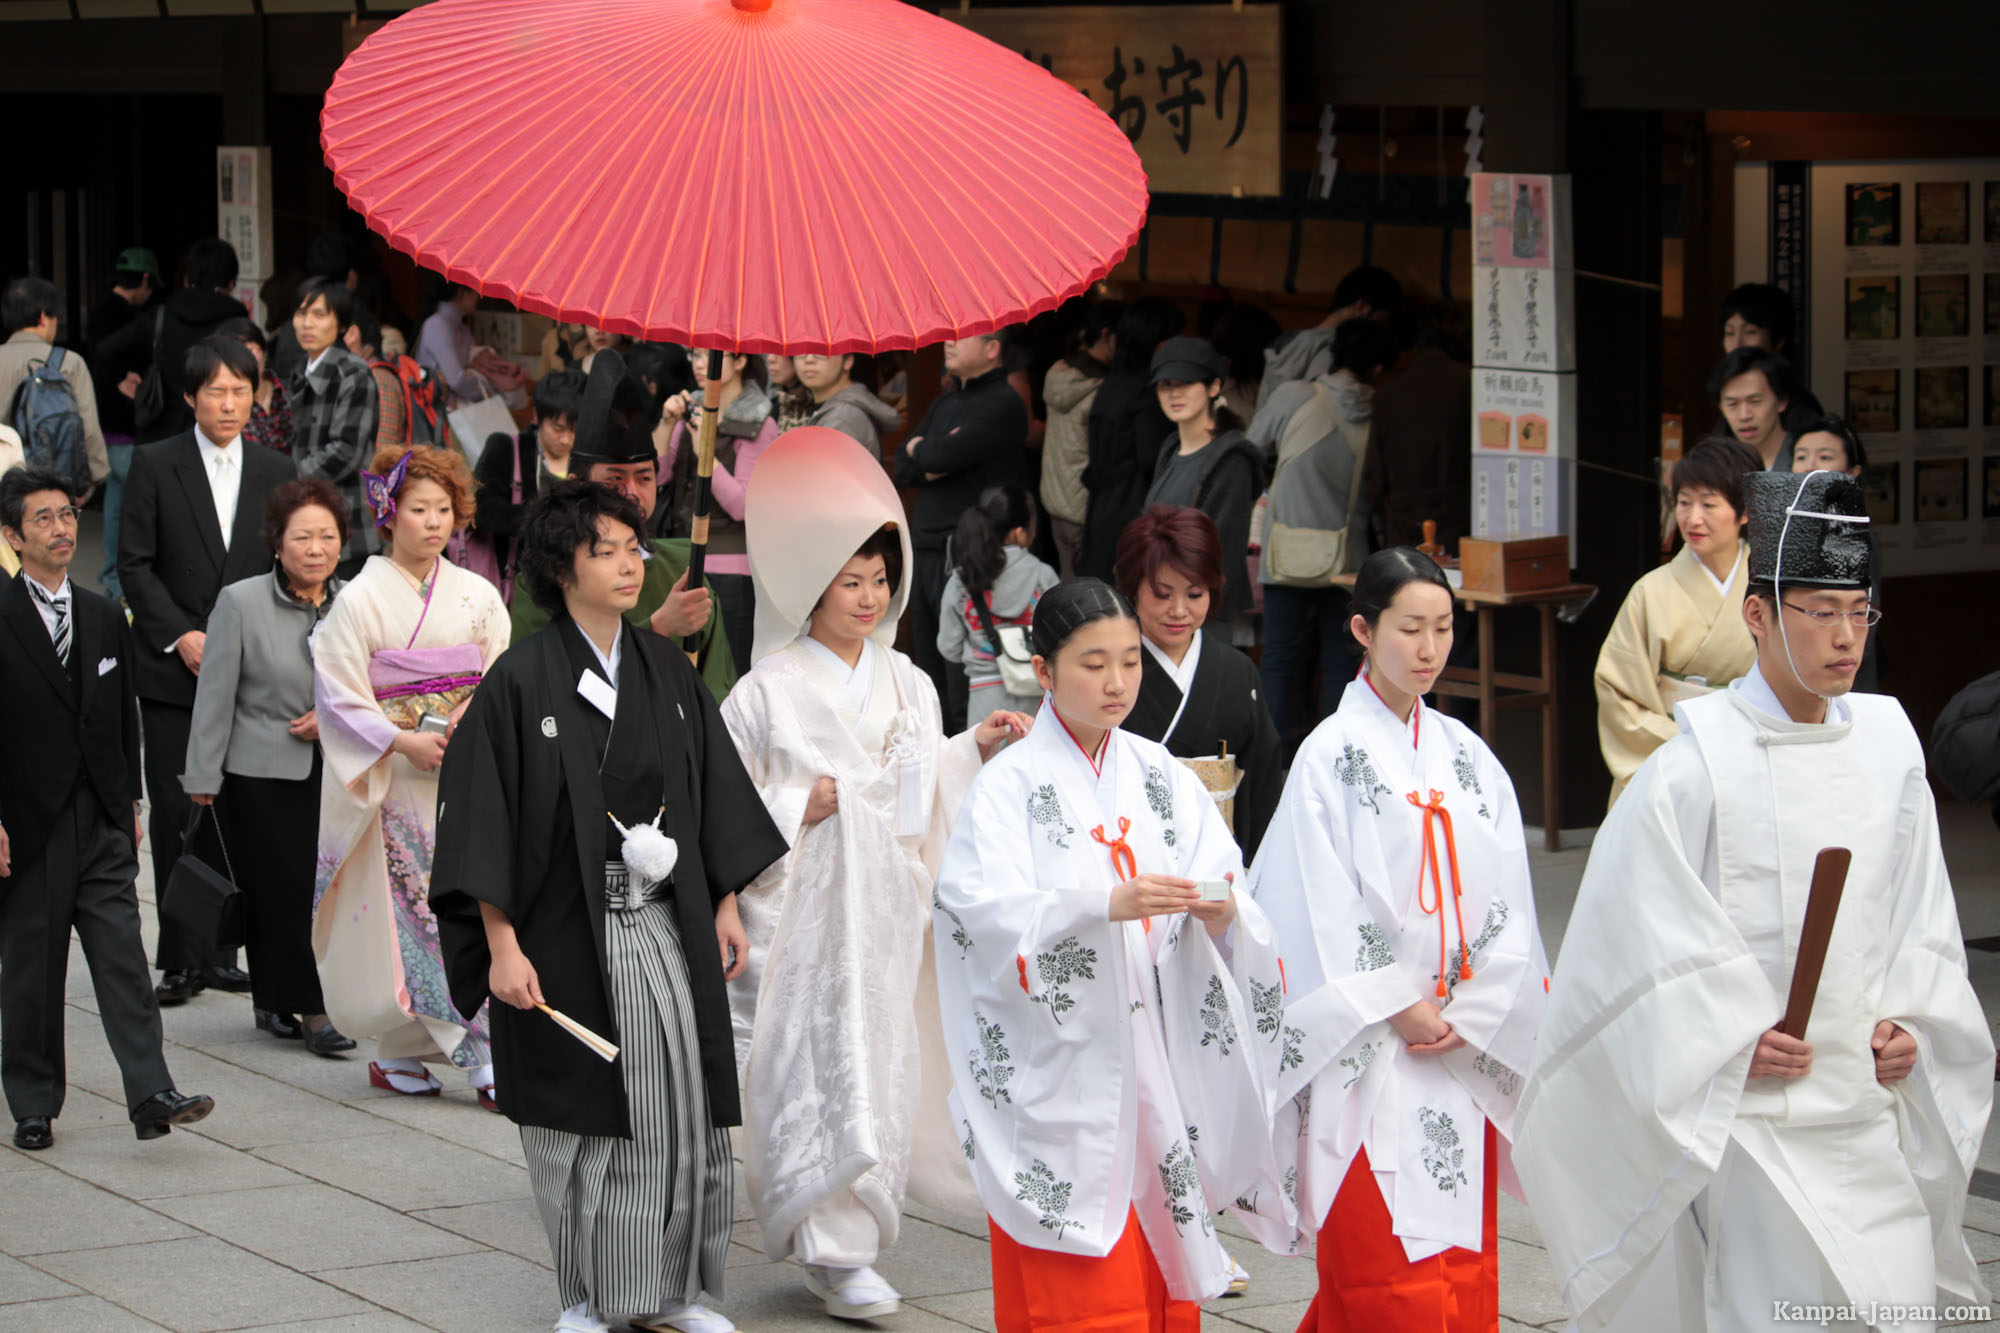 Wedding traditions in Japan